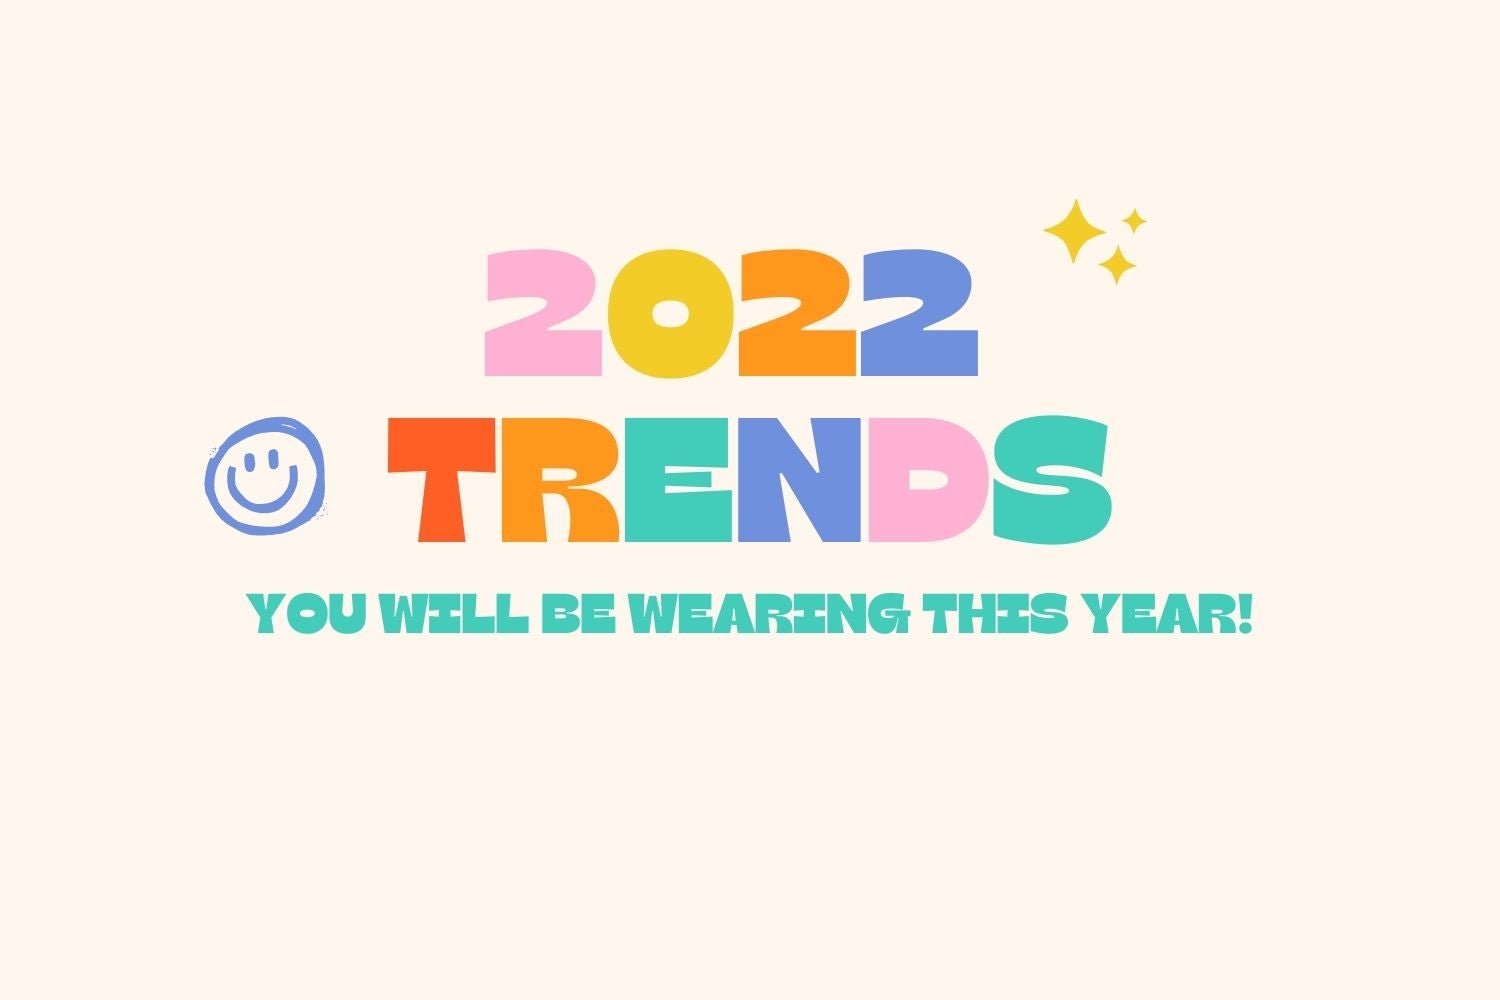 2022 Trends You will Be Wearing This Year!